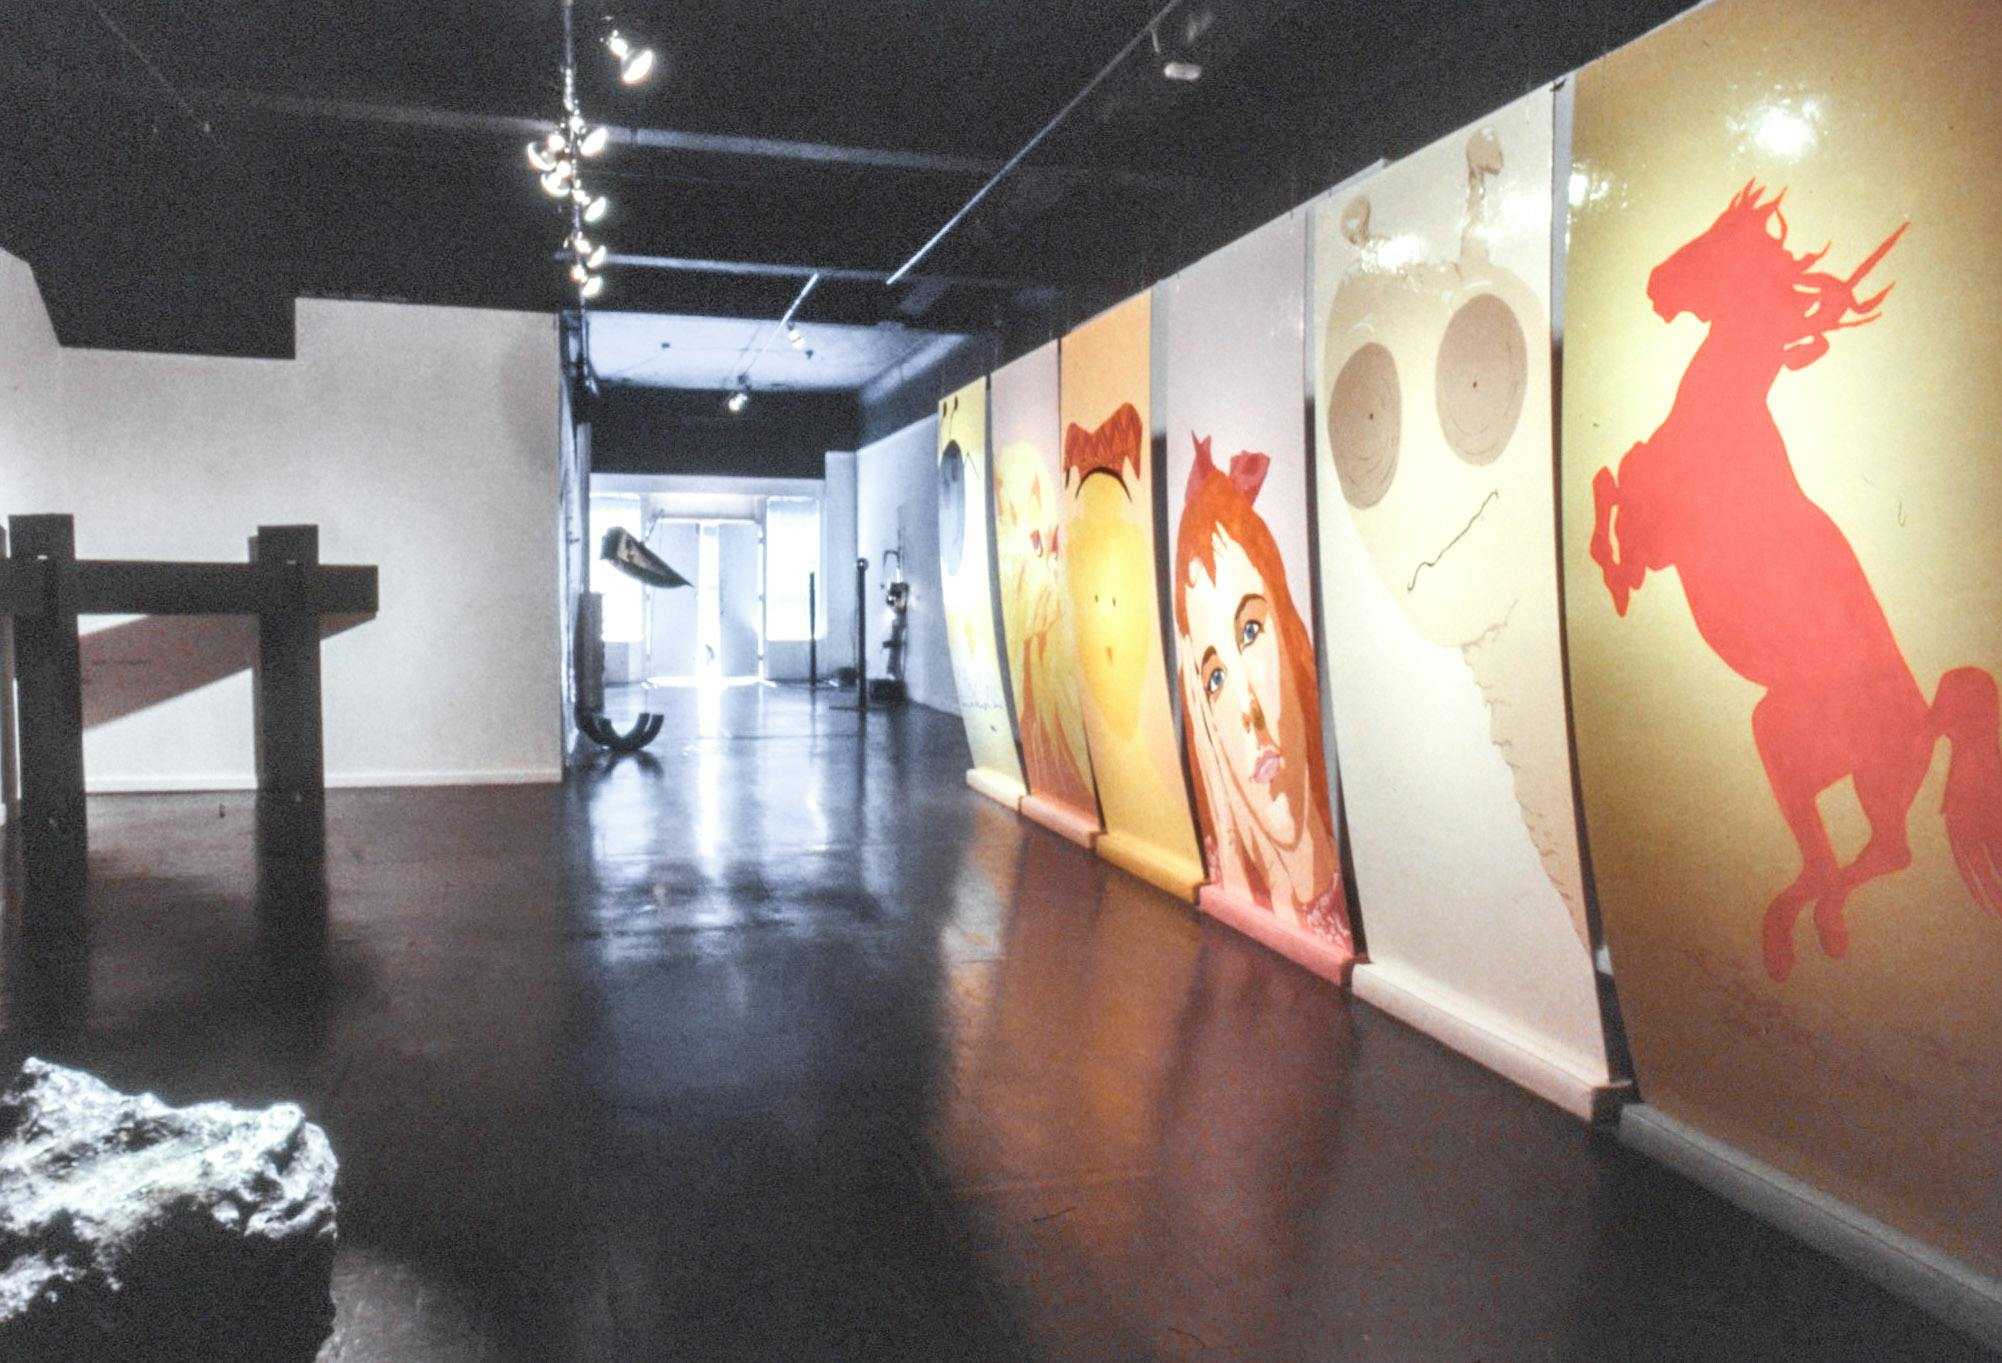 Multiple artworks visible in a gallery. Several colourful wall-to-ceiling paintings on glossy surfaces are visible on one side of the space. The rest of the space has various sculptures all around.